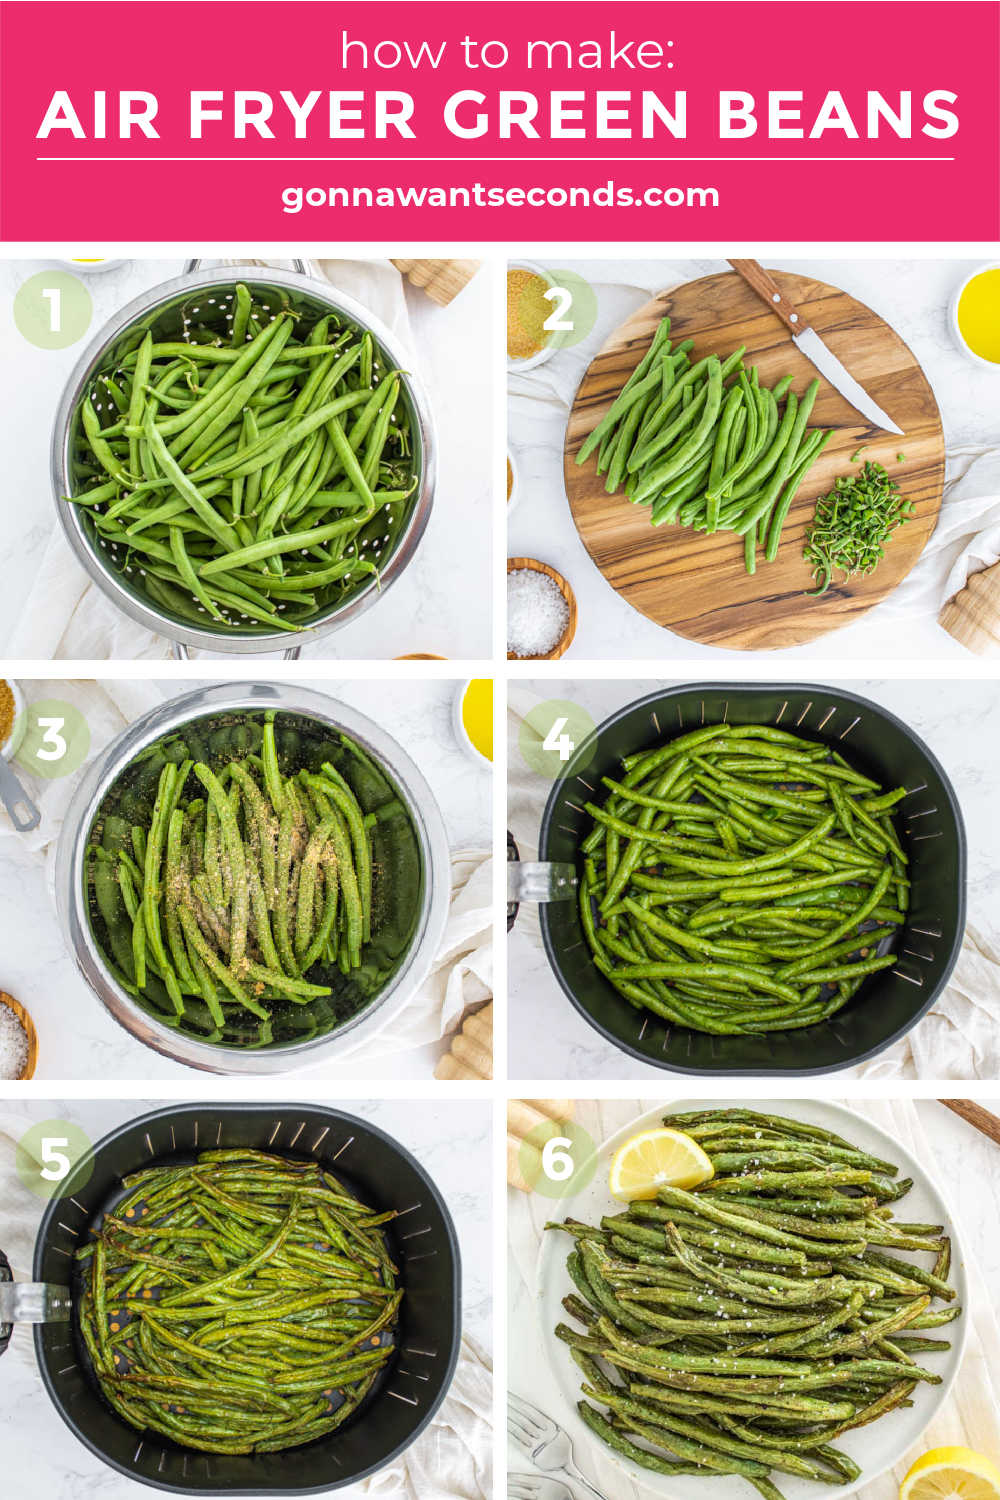 Step by step how to make Air Fryer Green Beans 